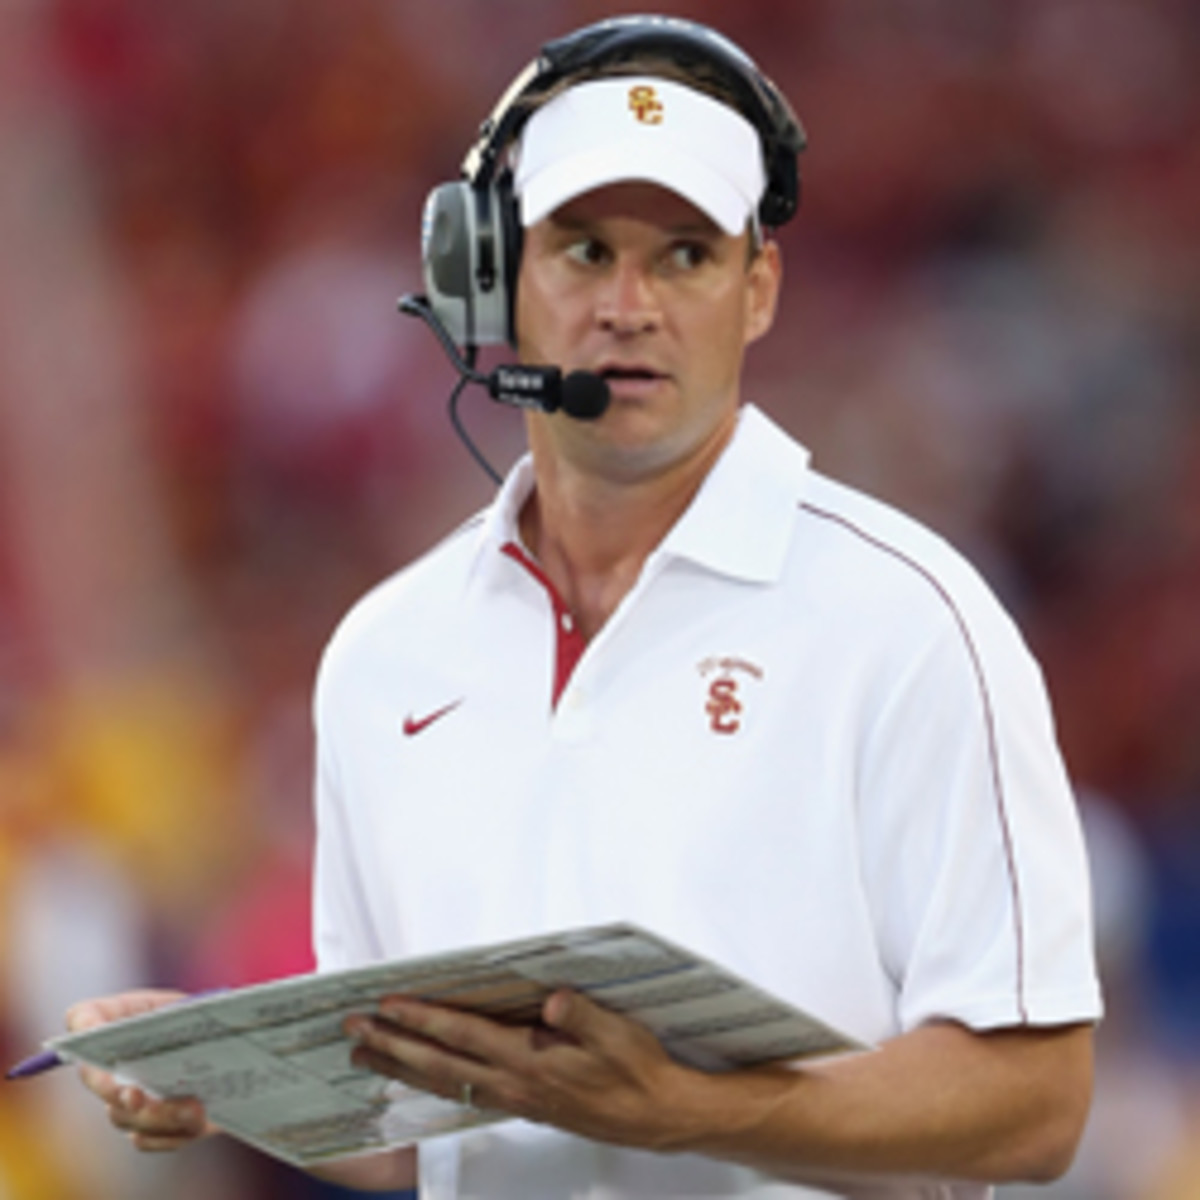 USC athletic director Pat Haden says coach Lane Kiffin's job is safe for now. (Jeff Gross/Getty Images)